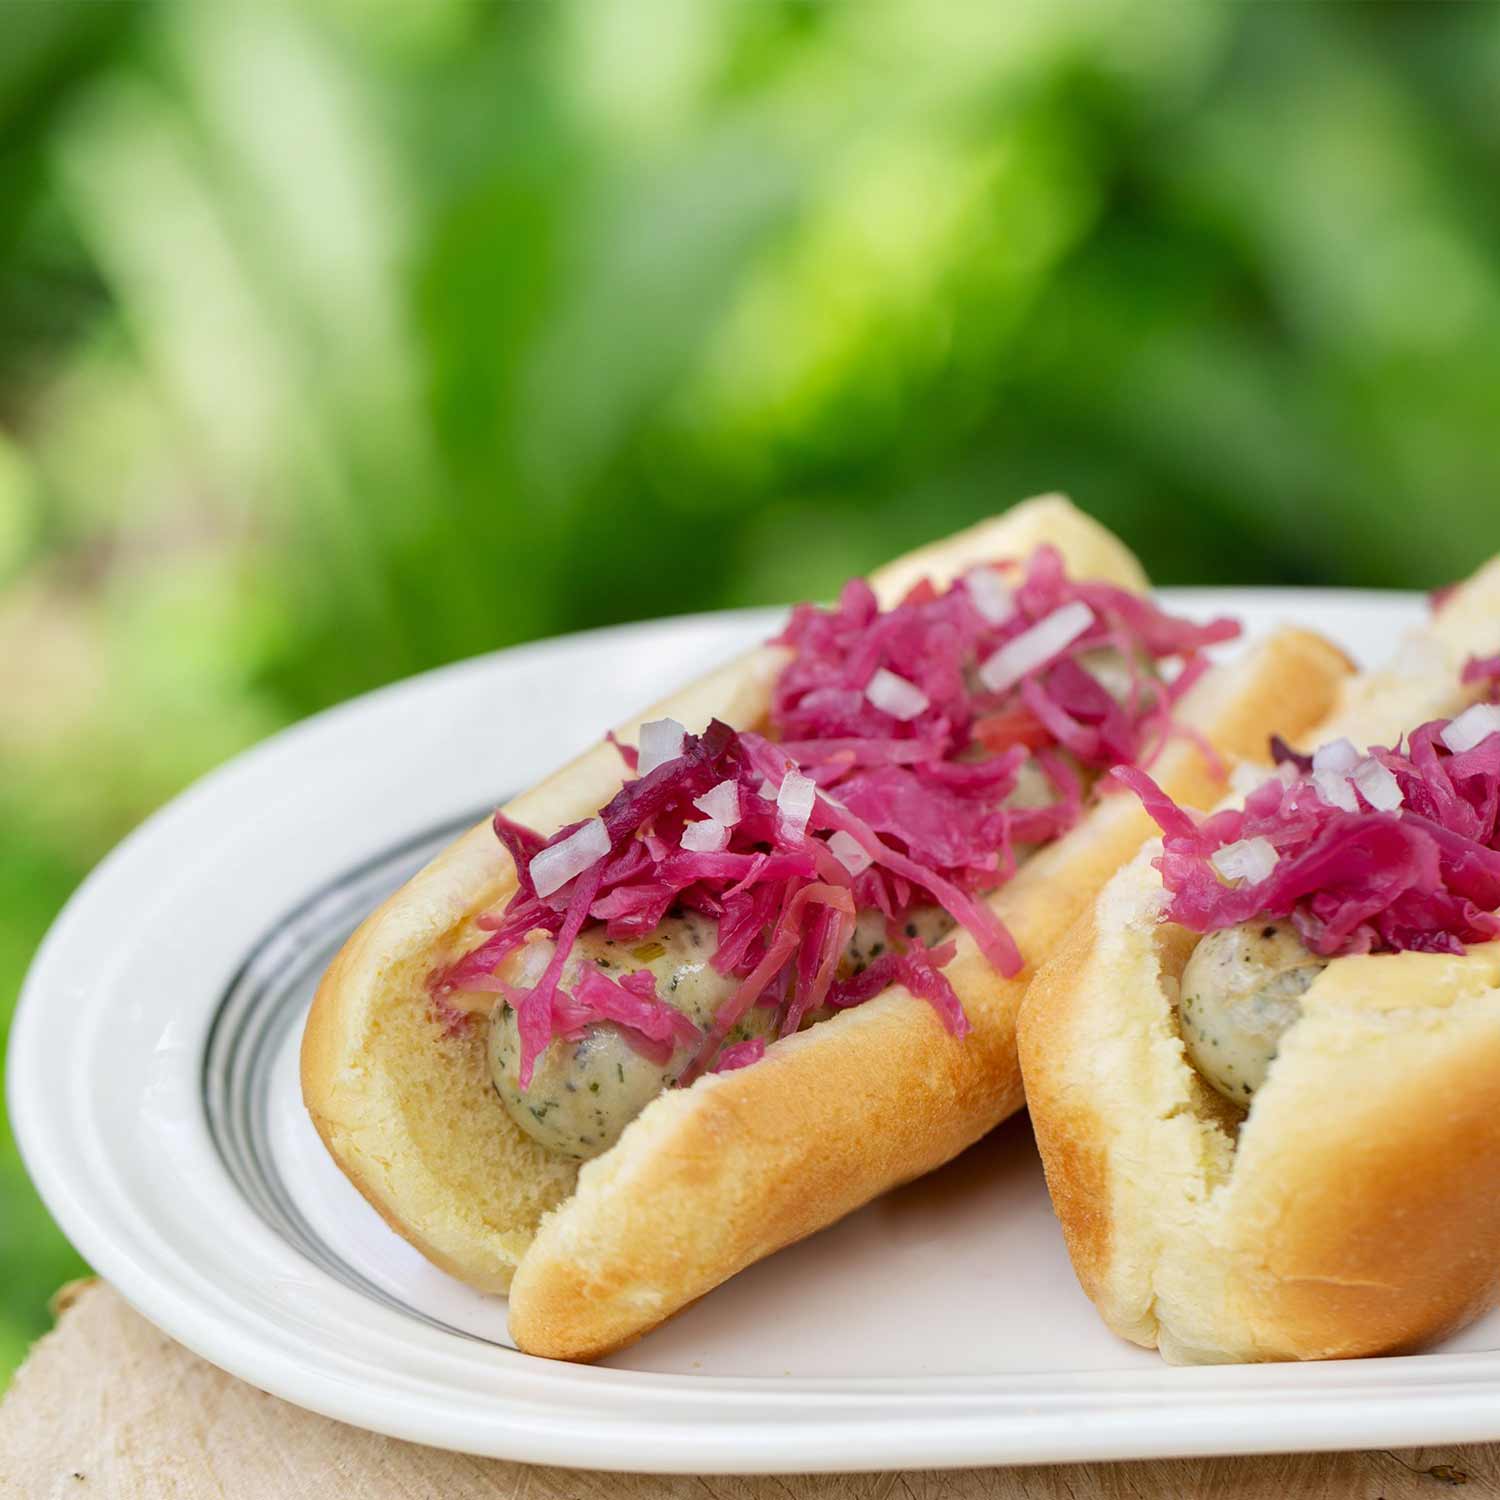 Youll need at least eight more lives to indulge in these gourmet hotdogs  #food #meal #foods #healthyfood #keto